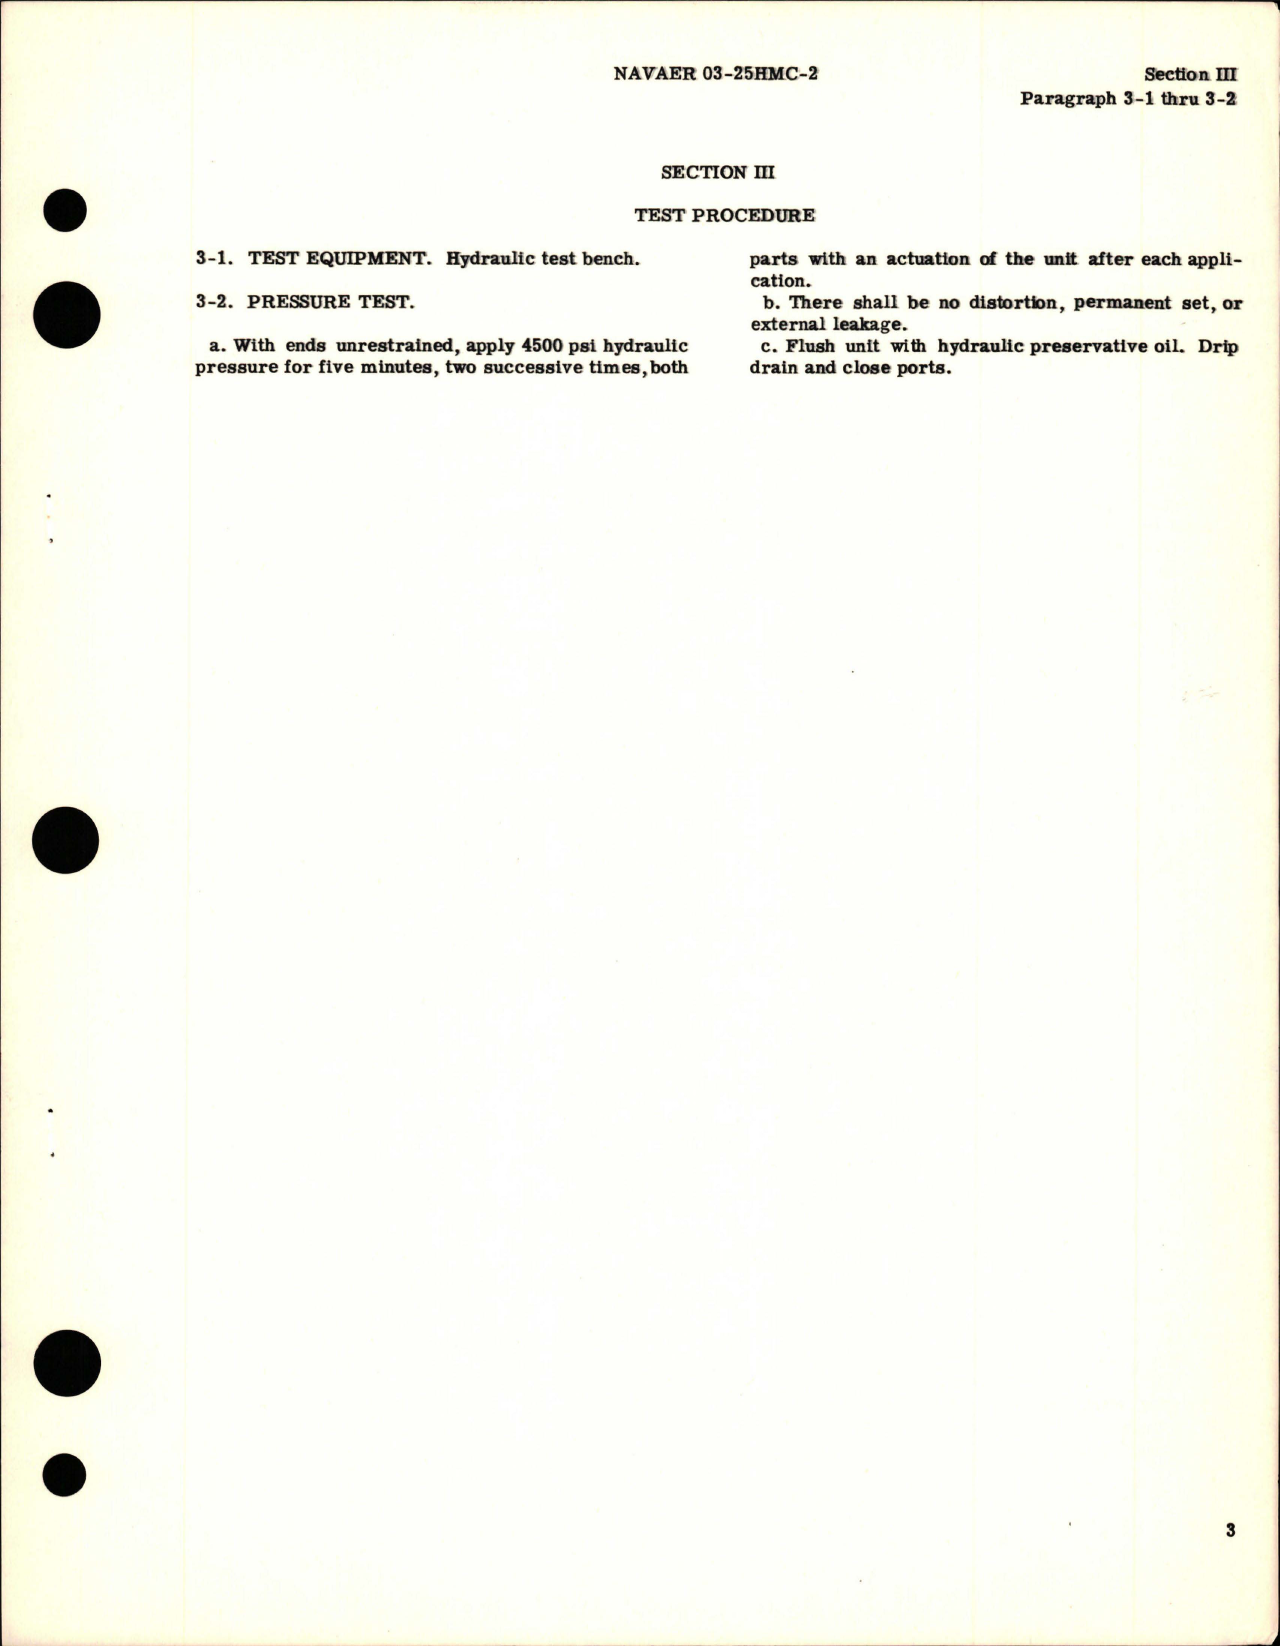 Sample page 5 from AirCorps Library document: Overhaul Instructions for Main Gear Uplock Cylinder Assembly - Parts 25-69022-301, 25-69022-302, 25-69022-303, and 5-26022-304